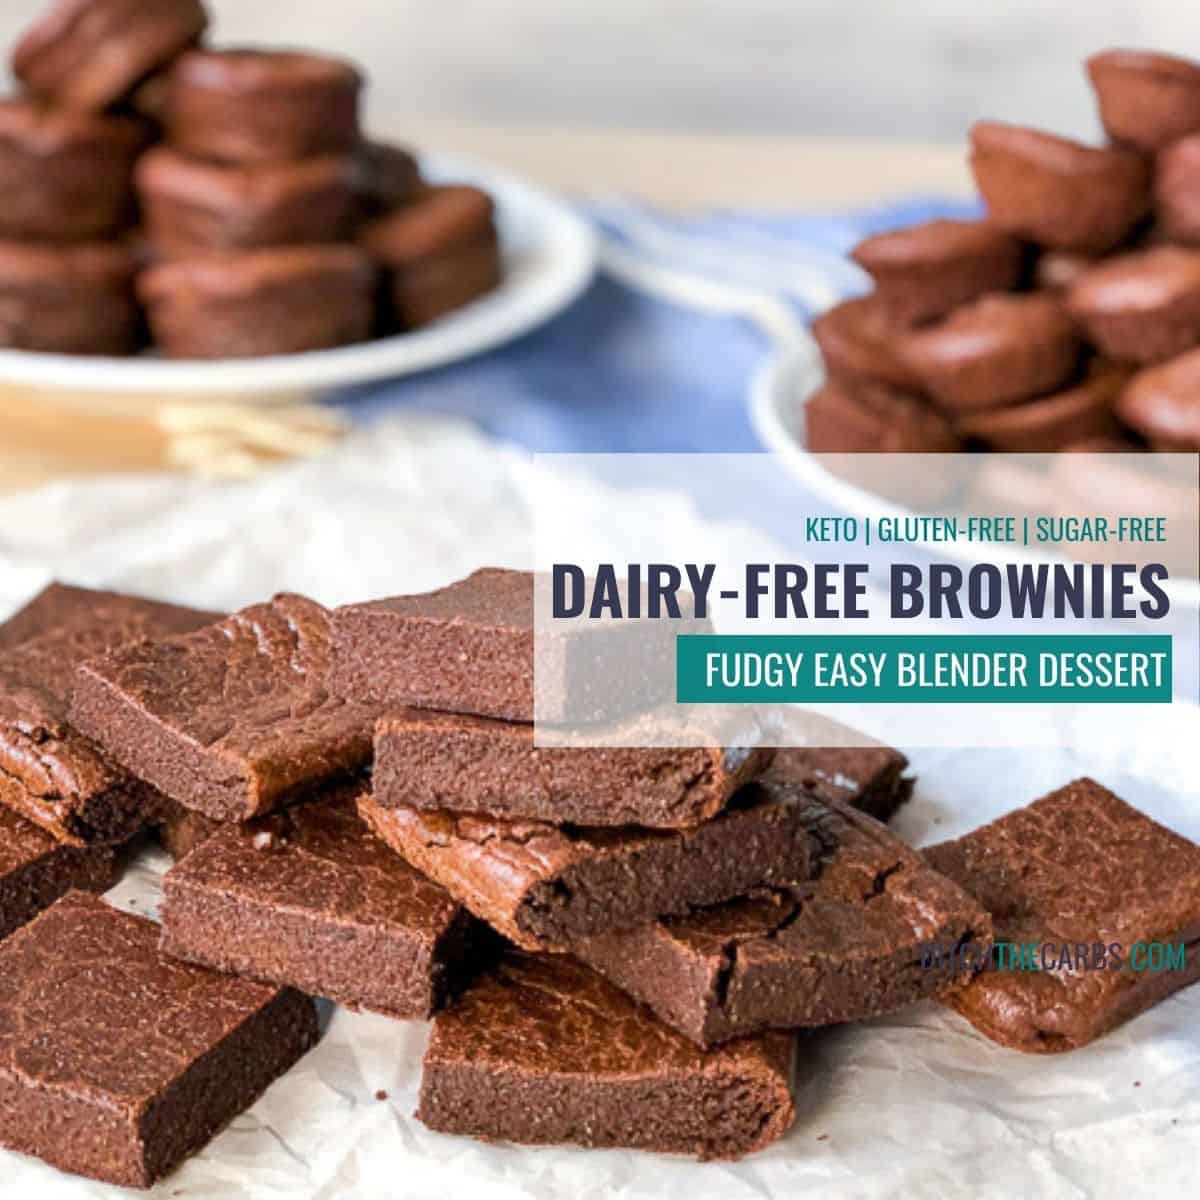 Enjoy these amazingly fudgy dairy-free brownies!